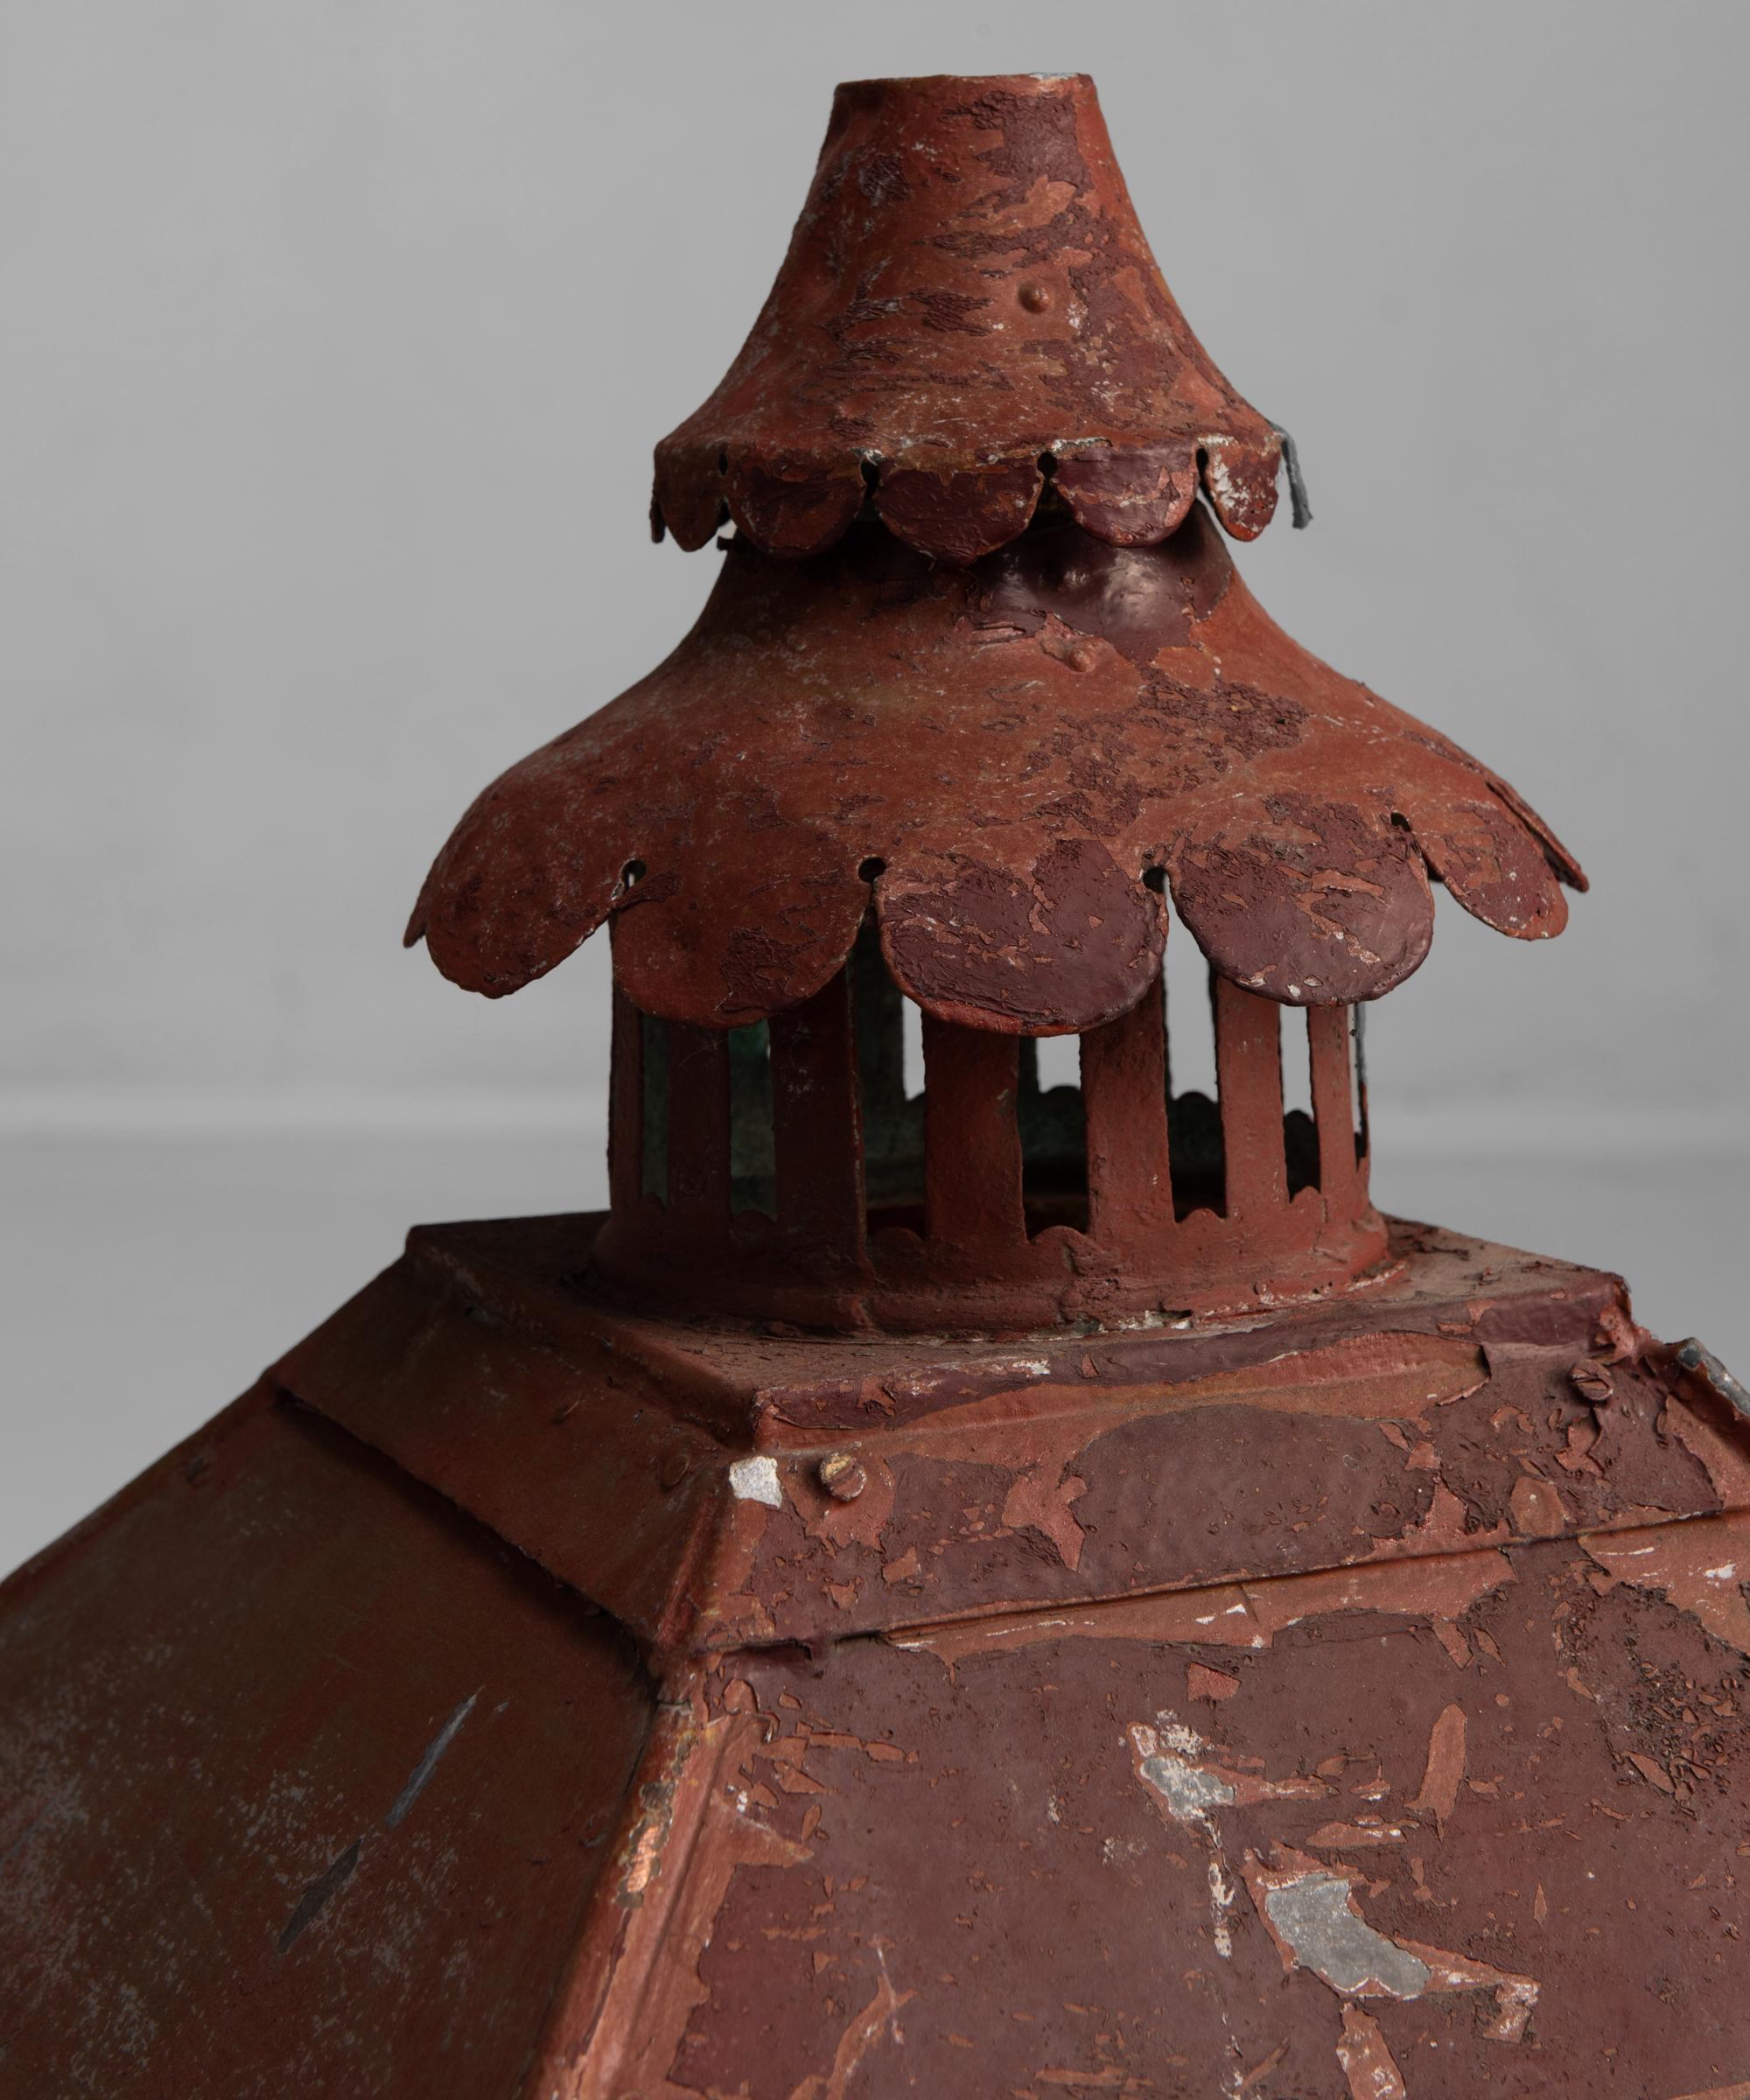 Copper lantern with ornate corners, decorative vented chimney and turned wood feet, all in original red finish.


Measures: 15.25